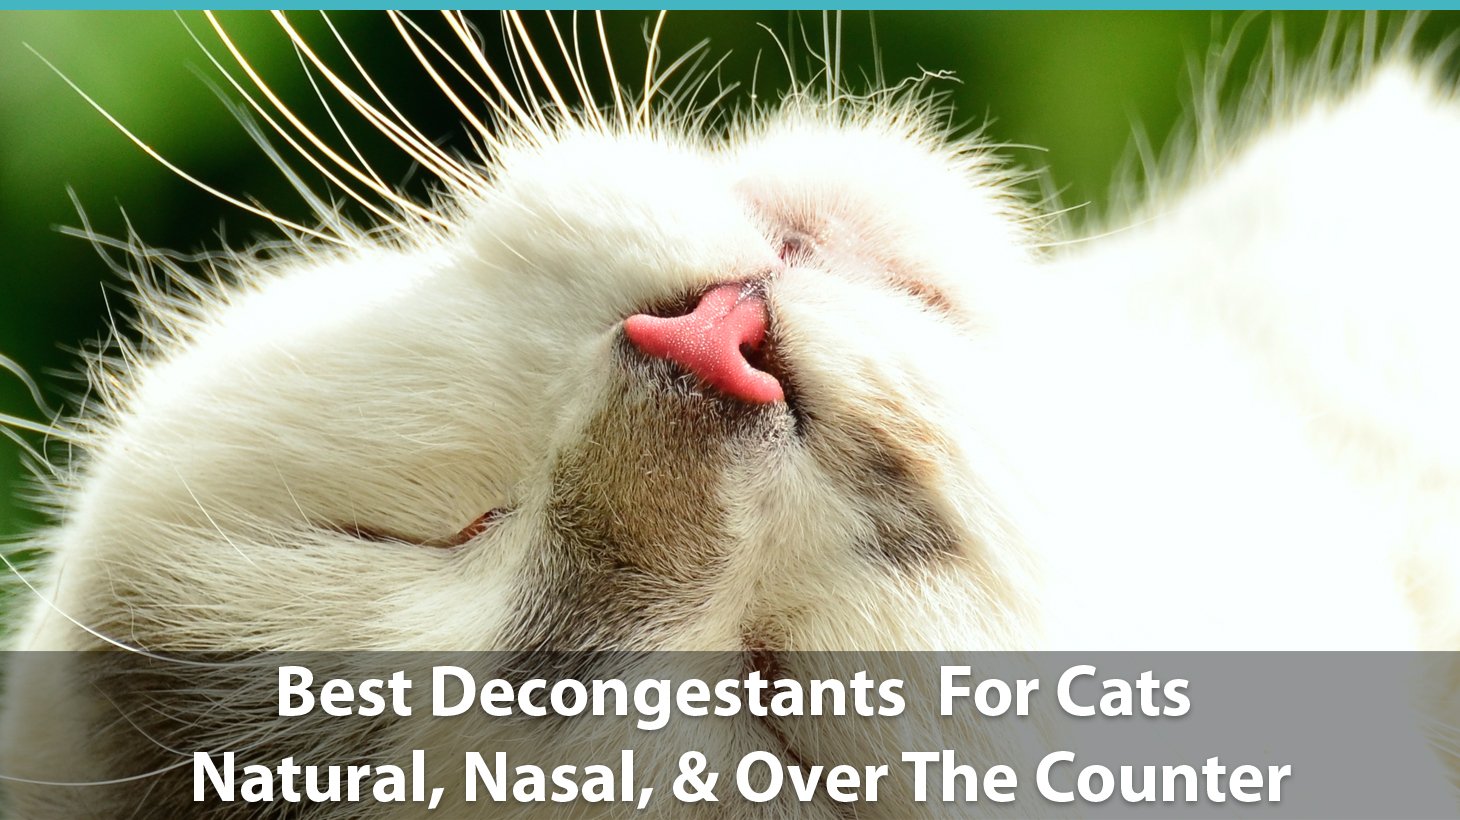 over the counter meds for cats